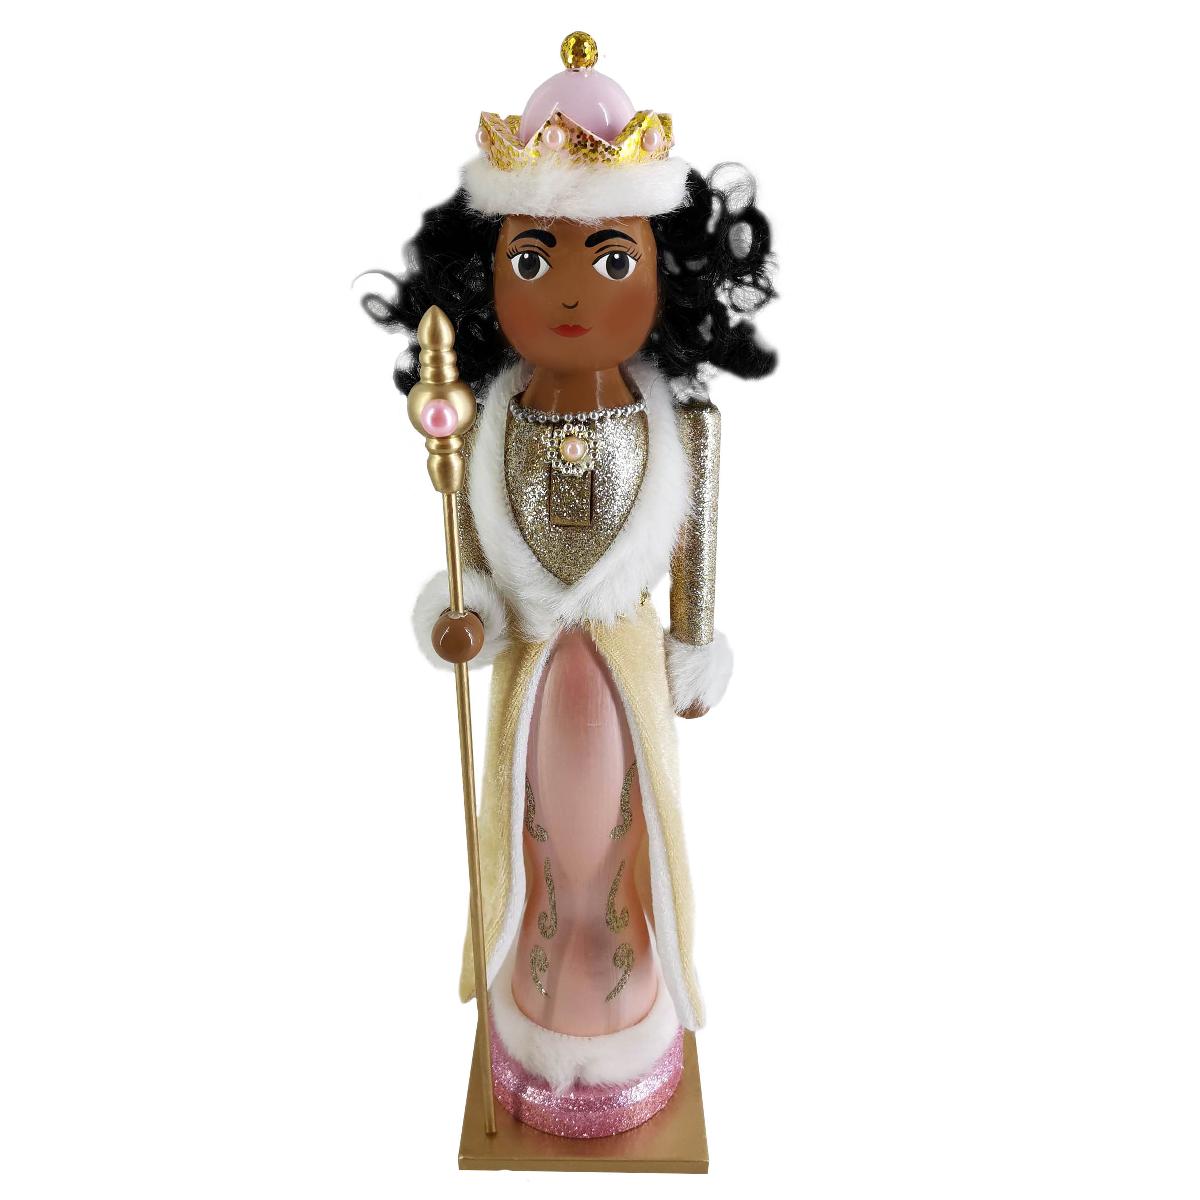 Fancy African American Rose Gold Nutcracker Queen in Pink Gold and White Fur Trim 14 Inch